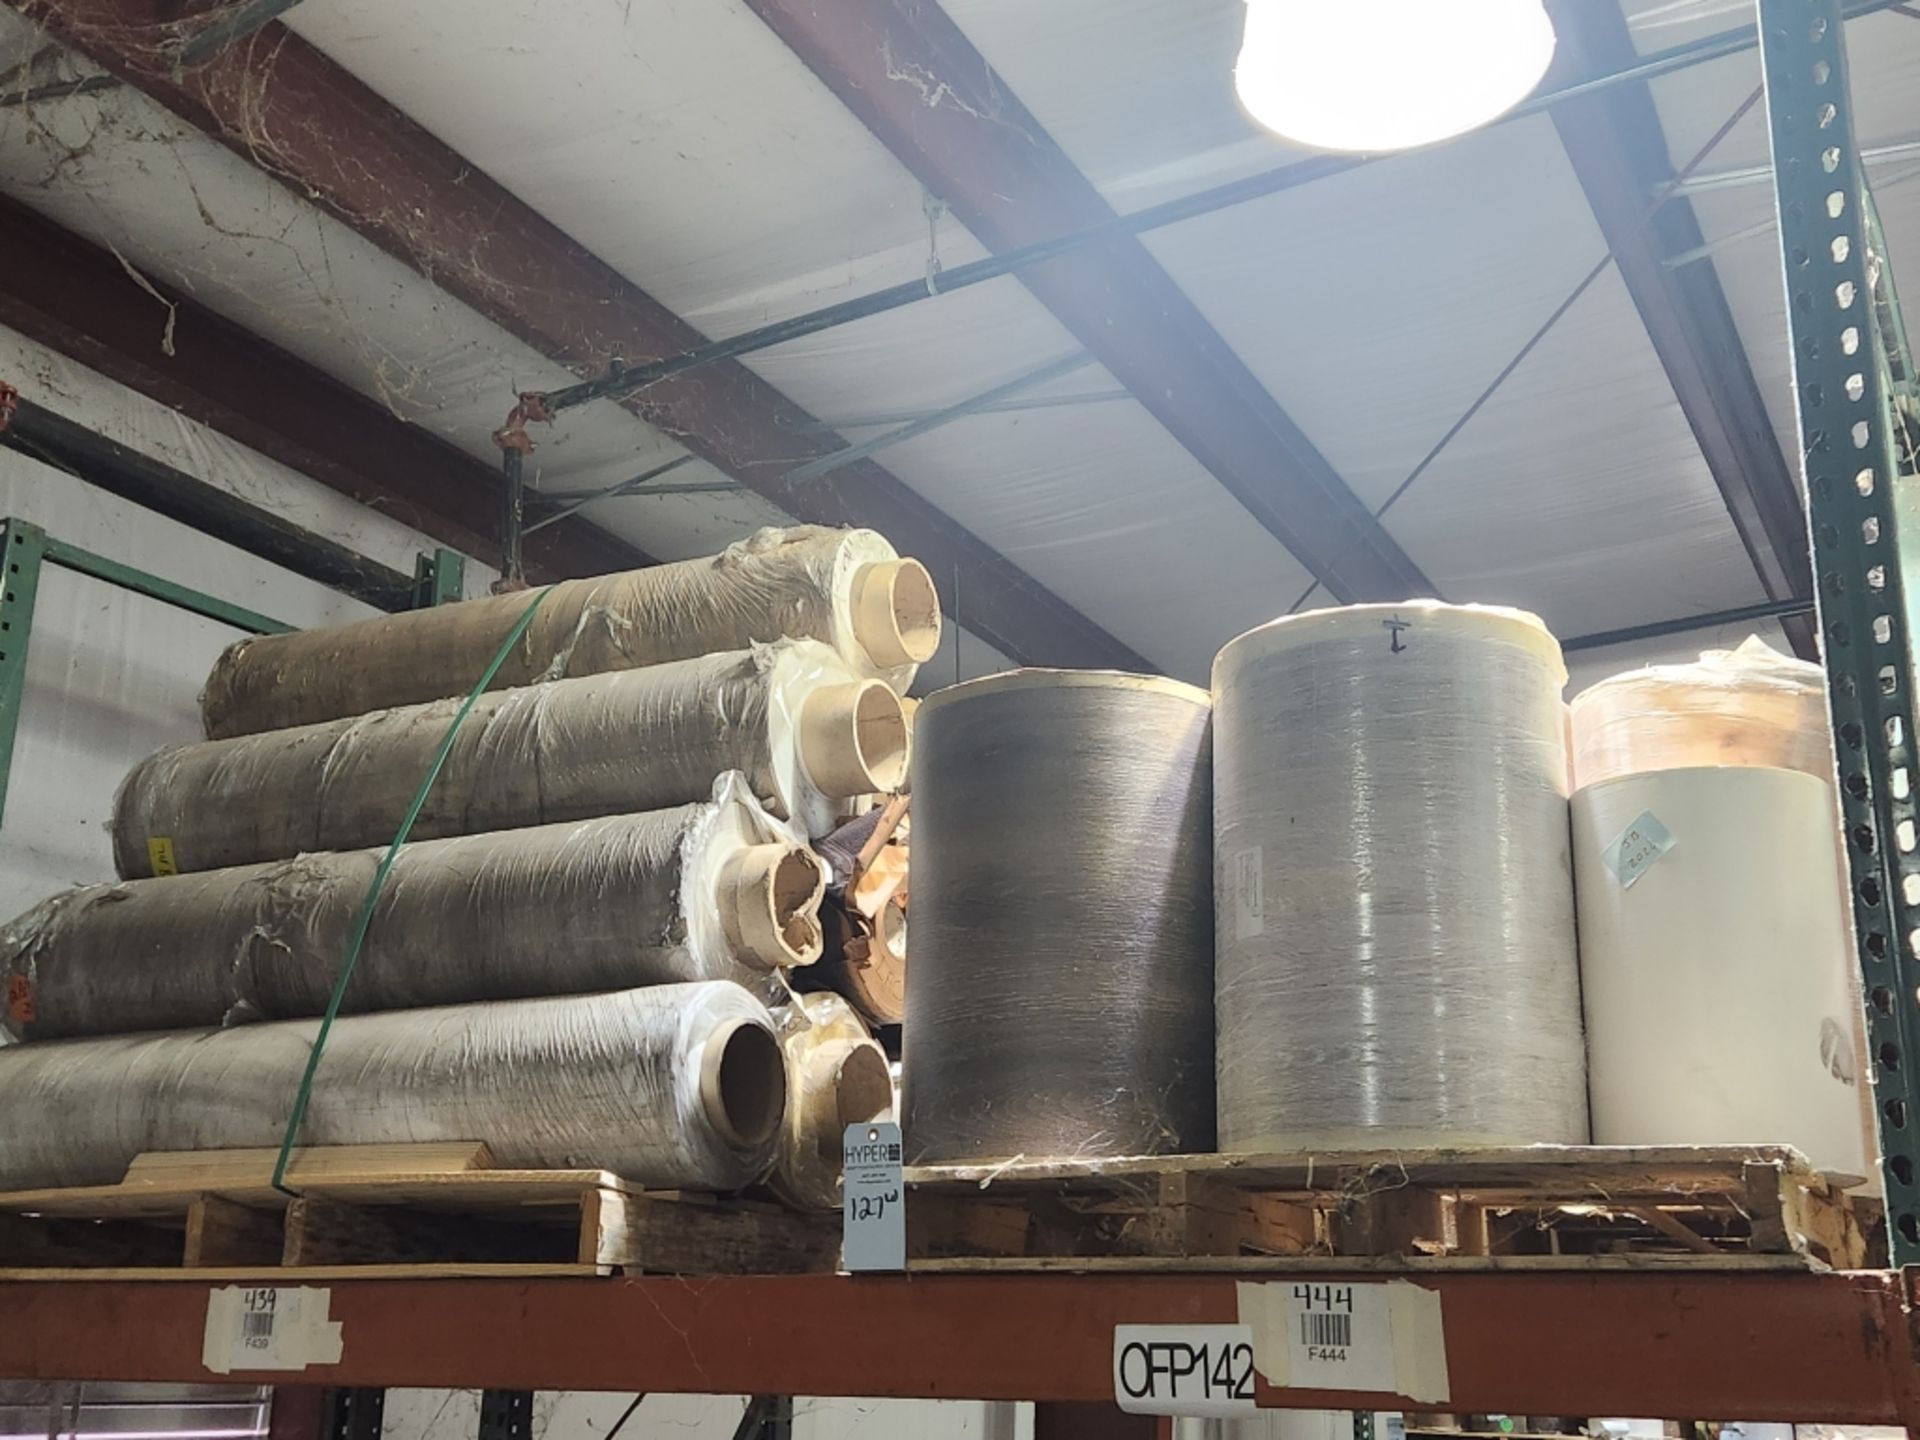 10 Pallets- (122) rolls of finished paper, various colors and sizes. See photos of product listing.